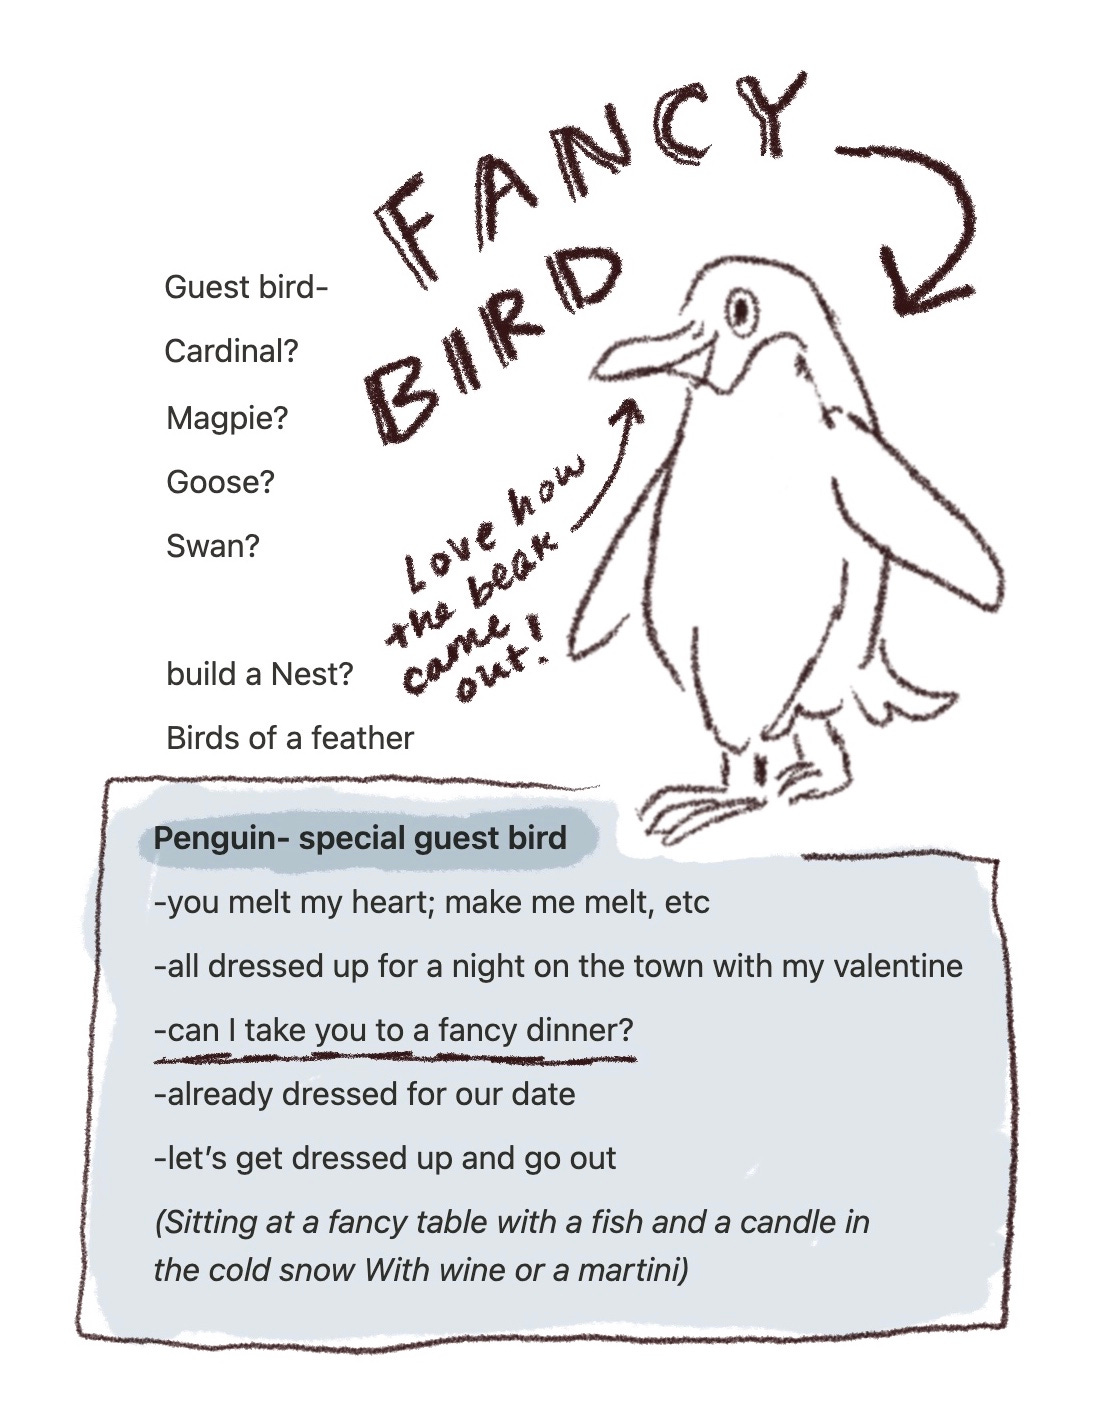 brainstorming process the penguin in my illustrated bird valentines by kayla stark